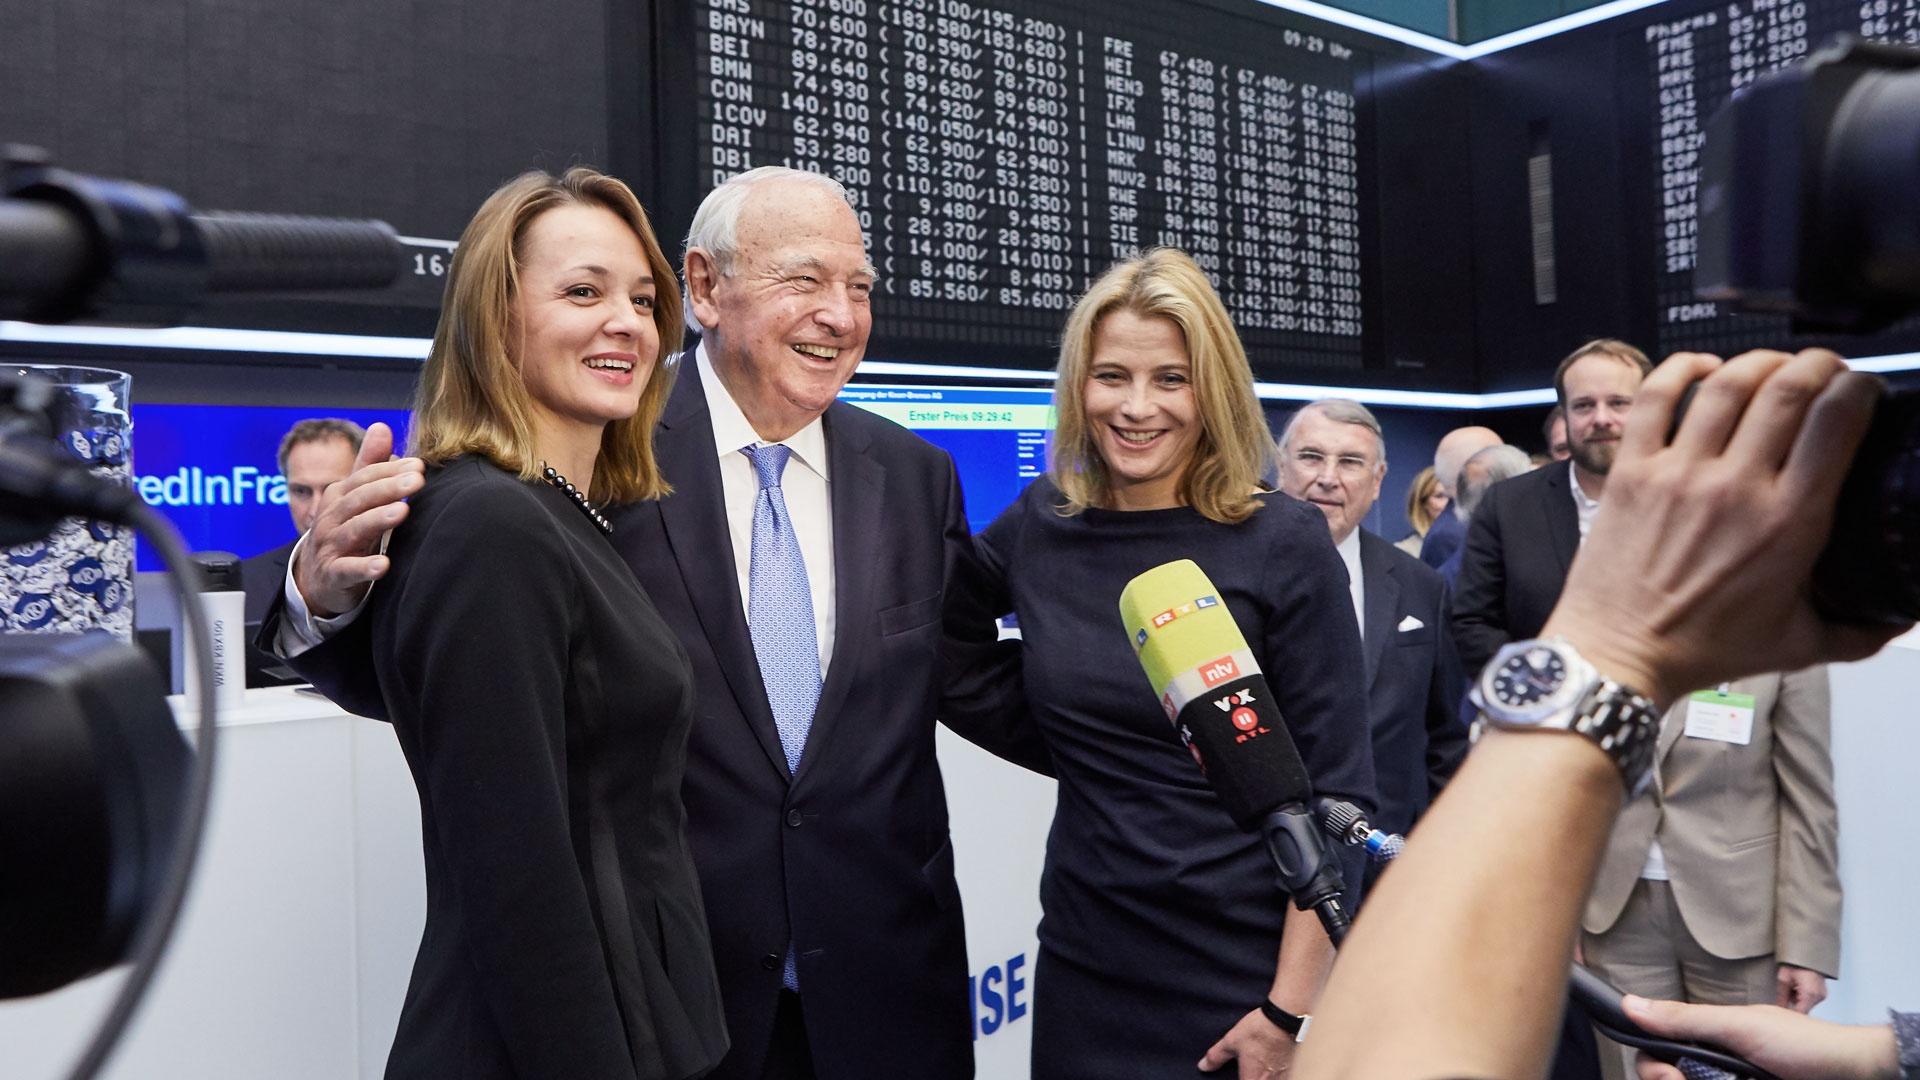 Heinz Hermann Thiele stands in front of TV cameras on the trading floor of the Frankfurt Stock Exchange; all three laugh and beam after the successful IPO of the Knorr-Bremse share.